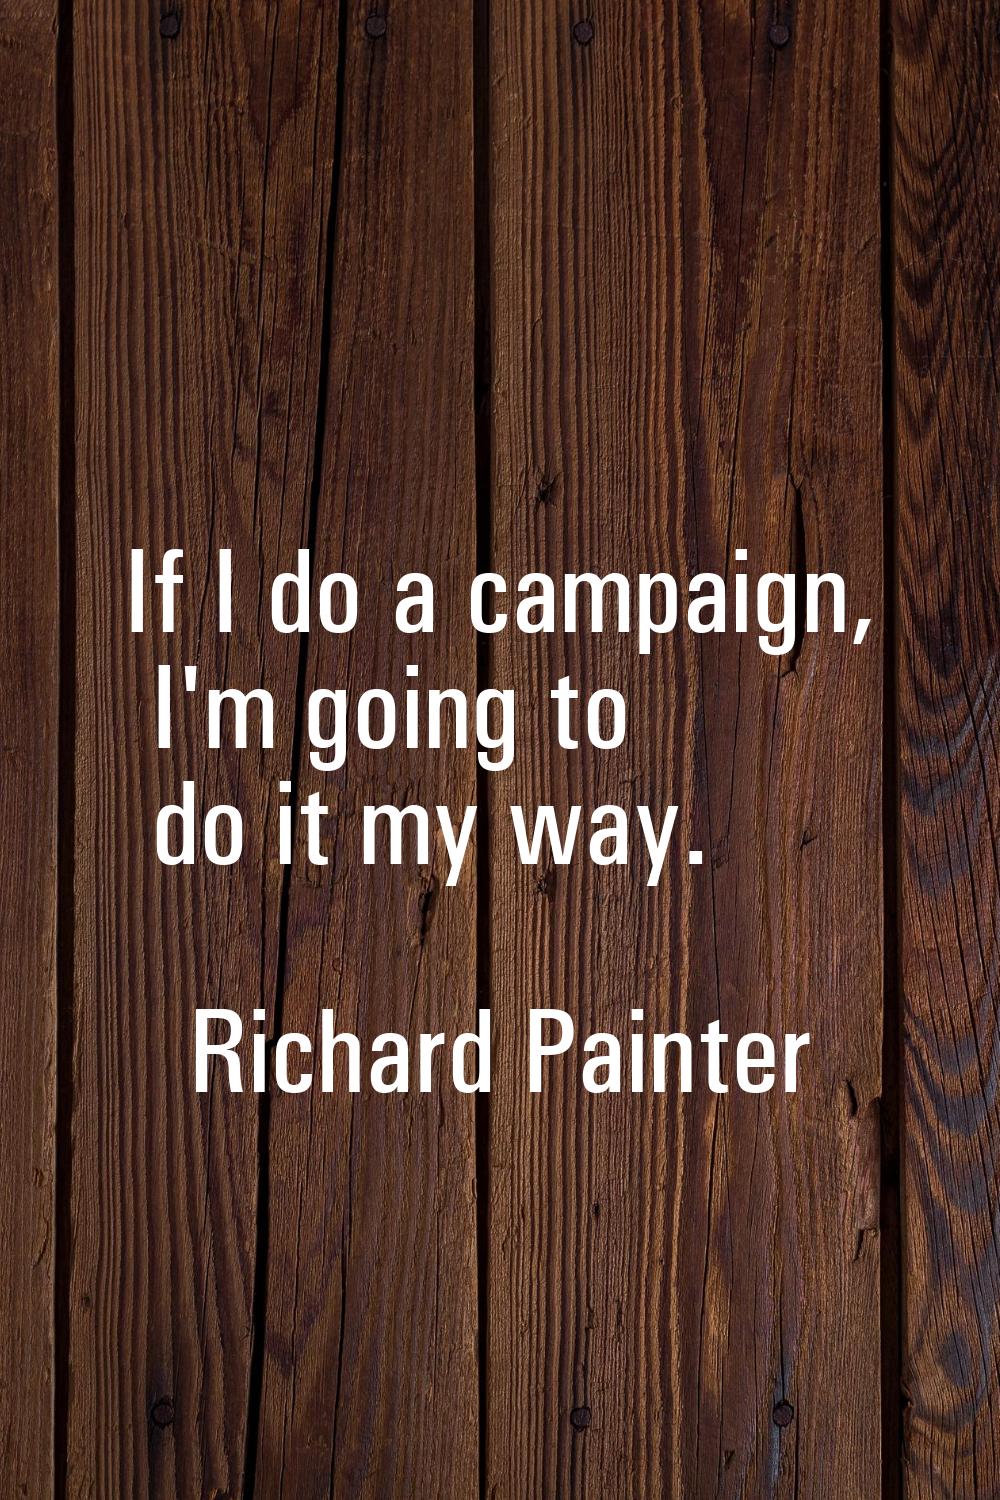 If I do a campaign, I'm going to do it my way.